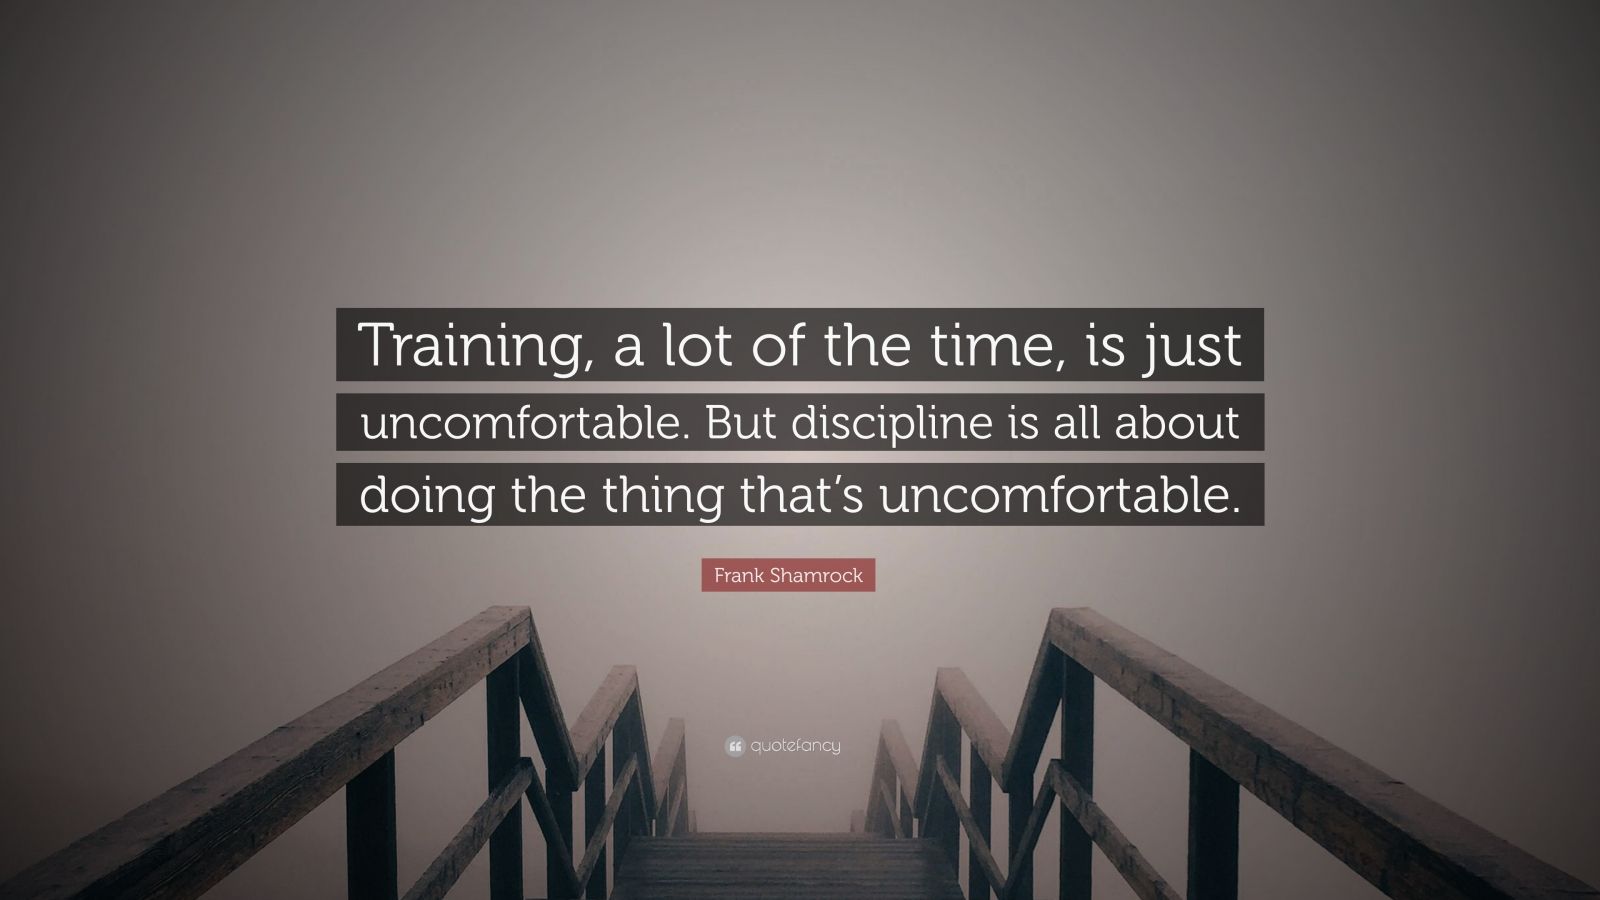 6349063-Frank-Shamrock-Quote-Training-a-lot-of-the-time-is-just.jpg